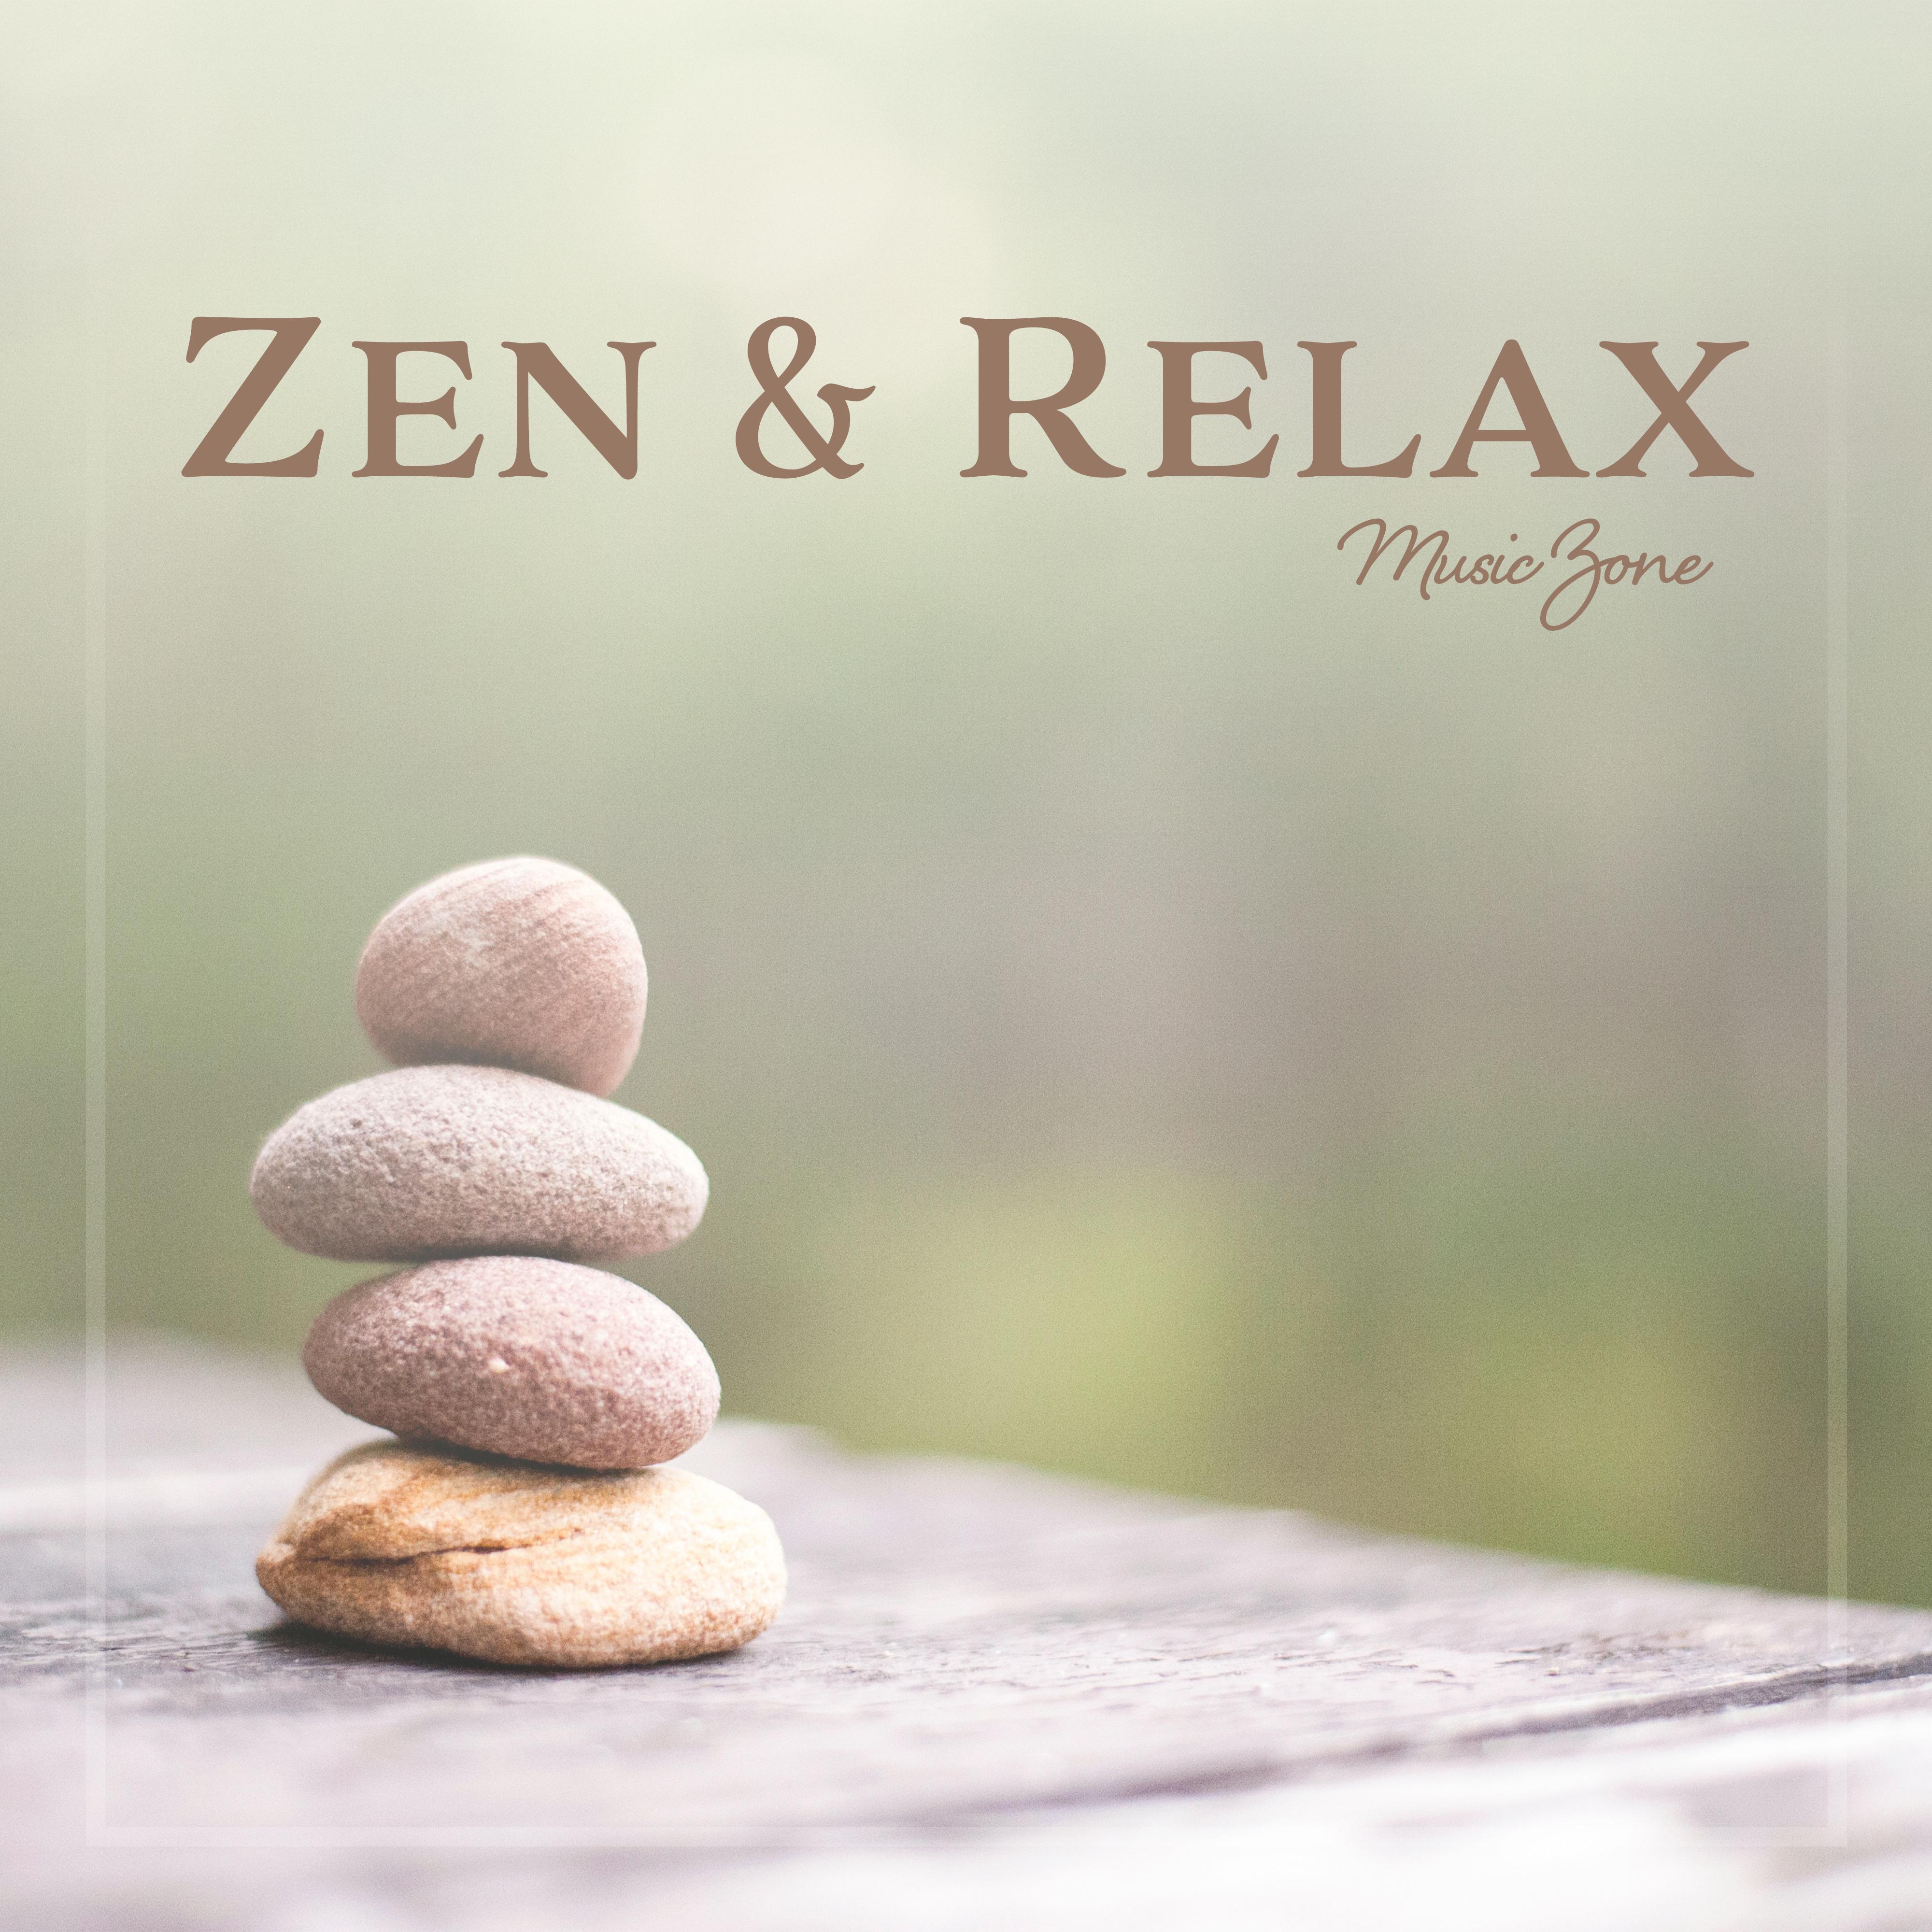 Zen & Relax Music Zone: 2019 New Age Deep Ambient & Nature Music, Mix of Songs Perfect for Meditation & Inner Relaxation, Chakra Healing, Body & Mind Regeneration